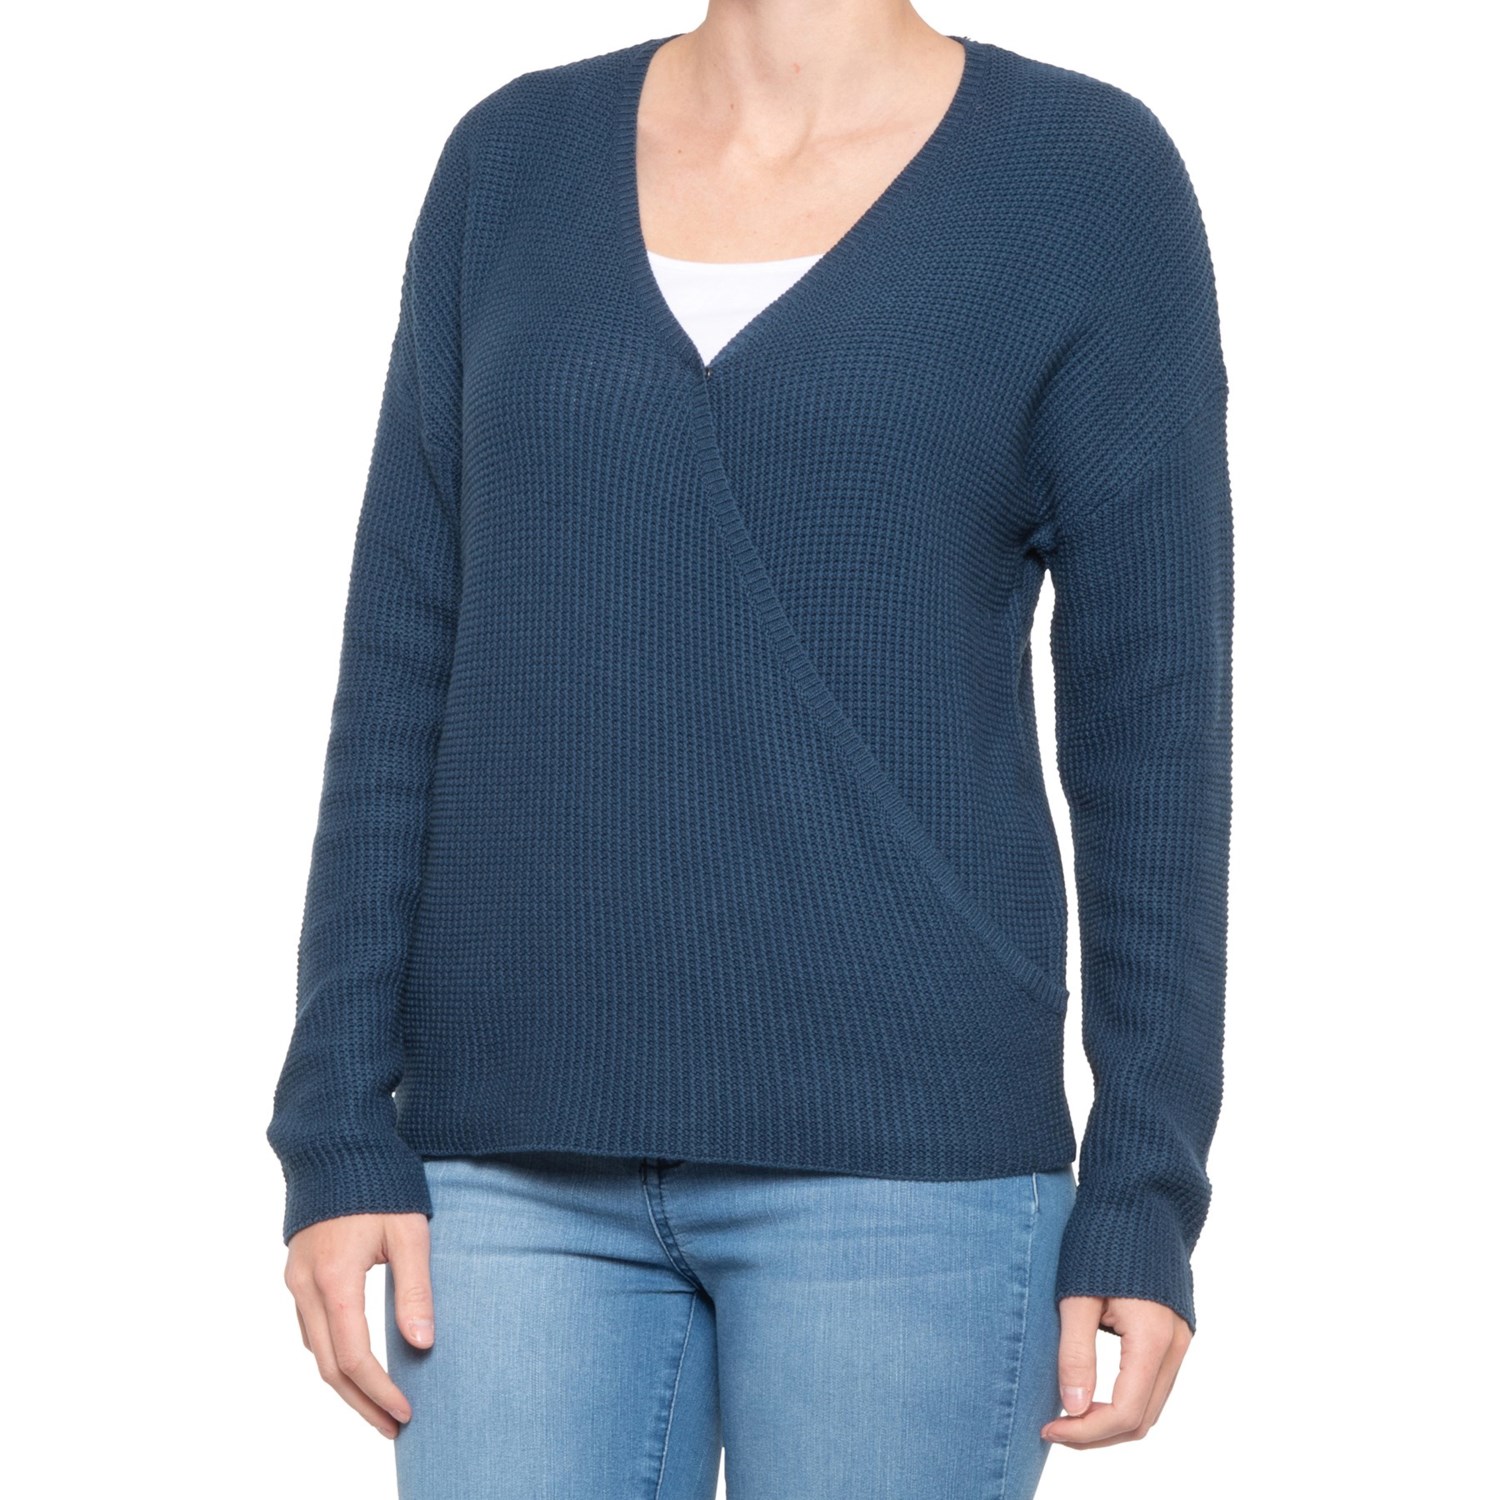 Another Love Ellie Sweater (For Women) - Save 75%